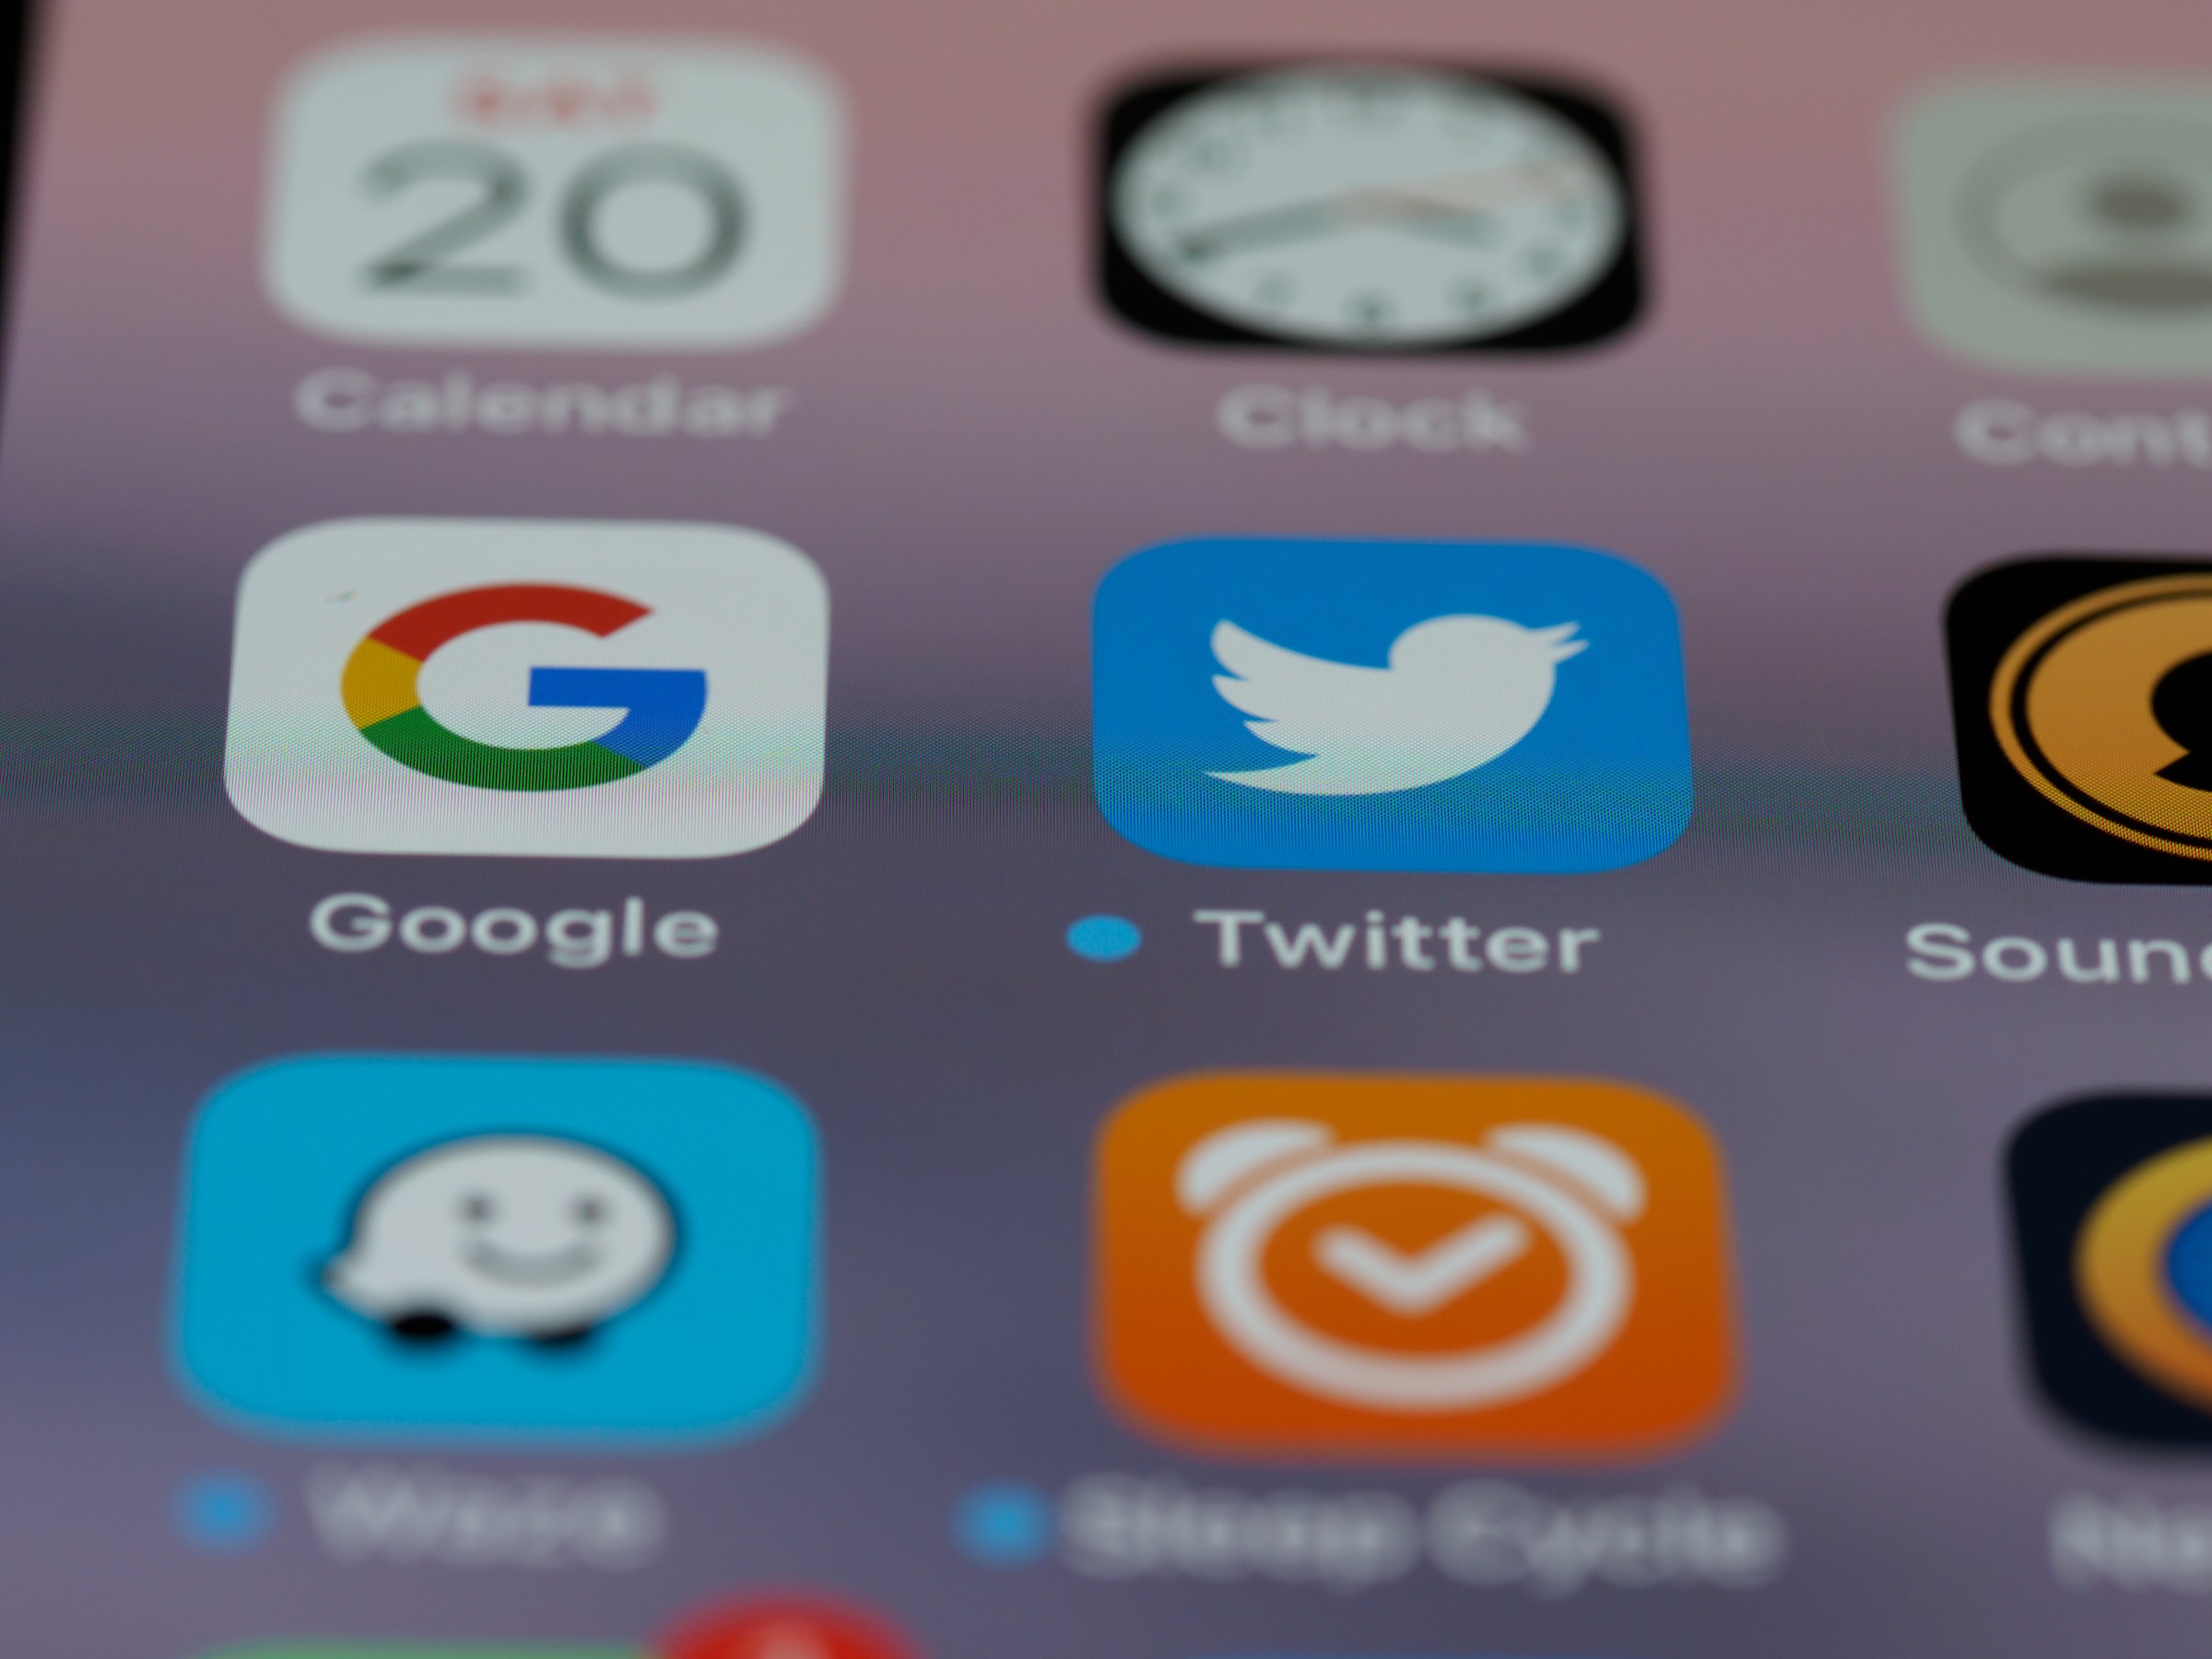 Google and twitter icon in IOS